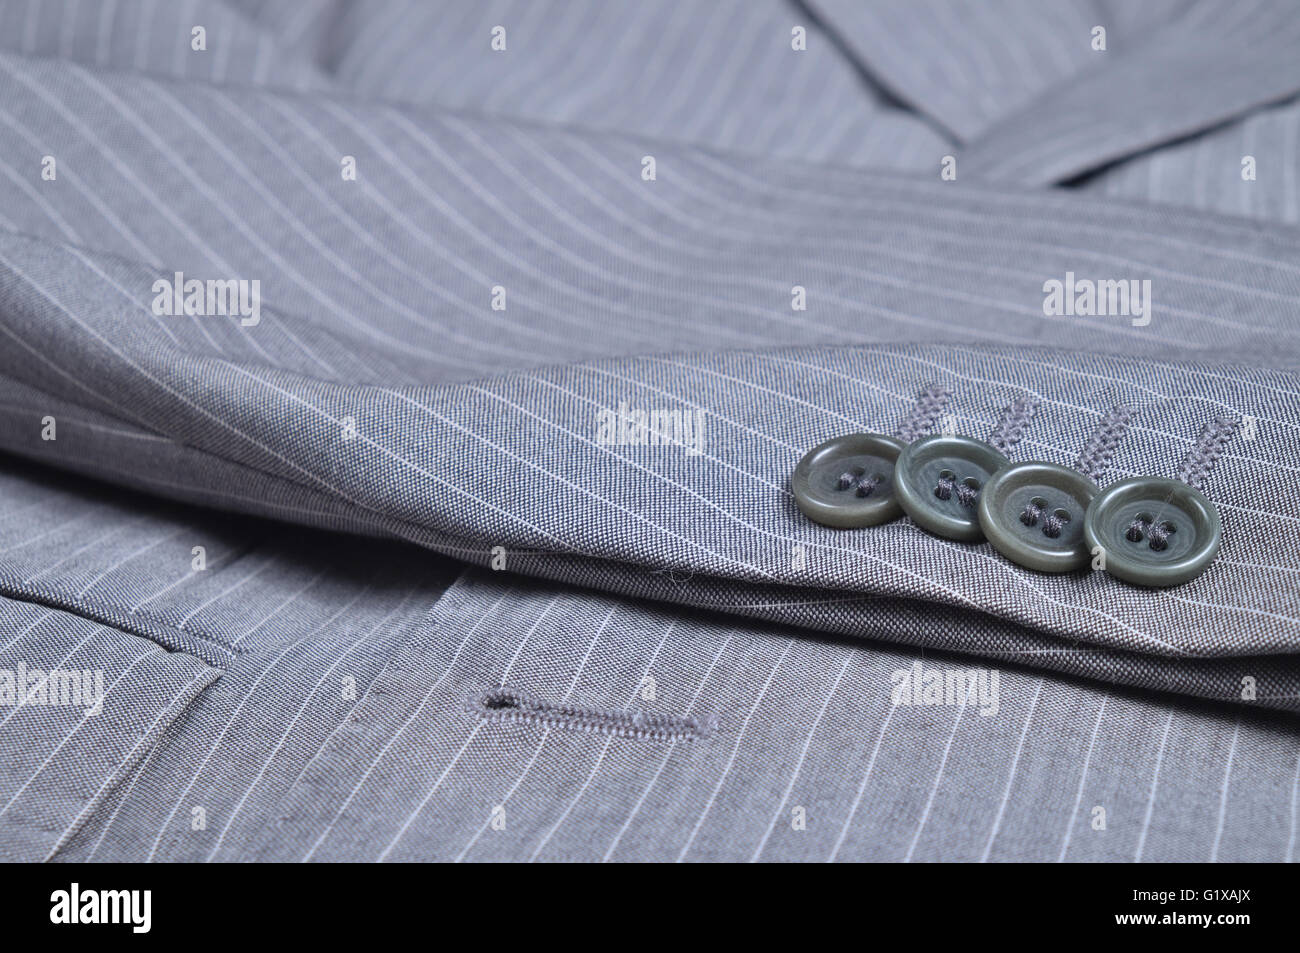 Classic gray striped business suit. Fashion and classic trends Stock Photo